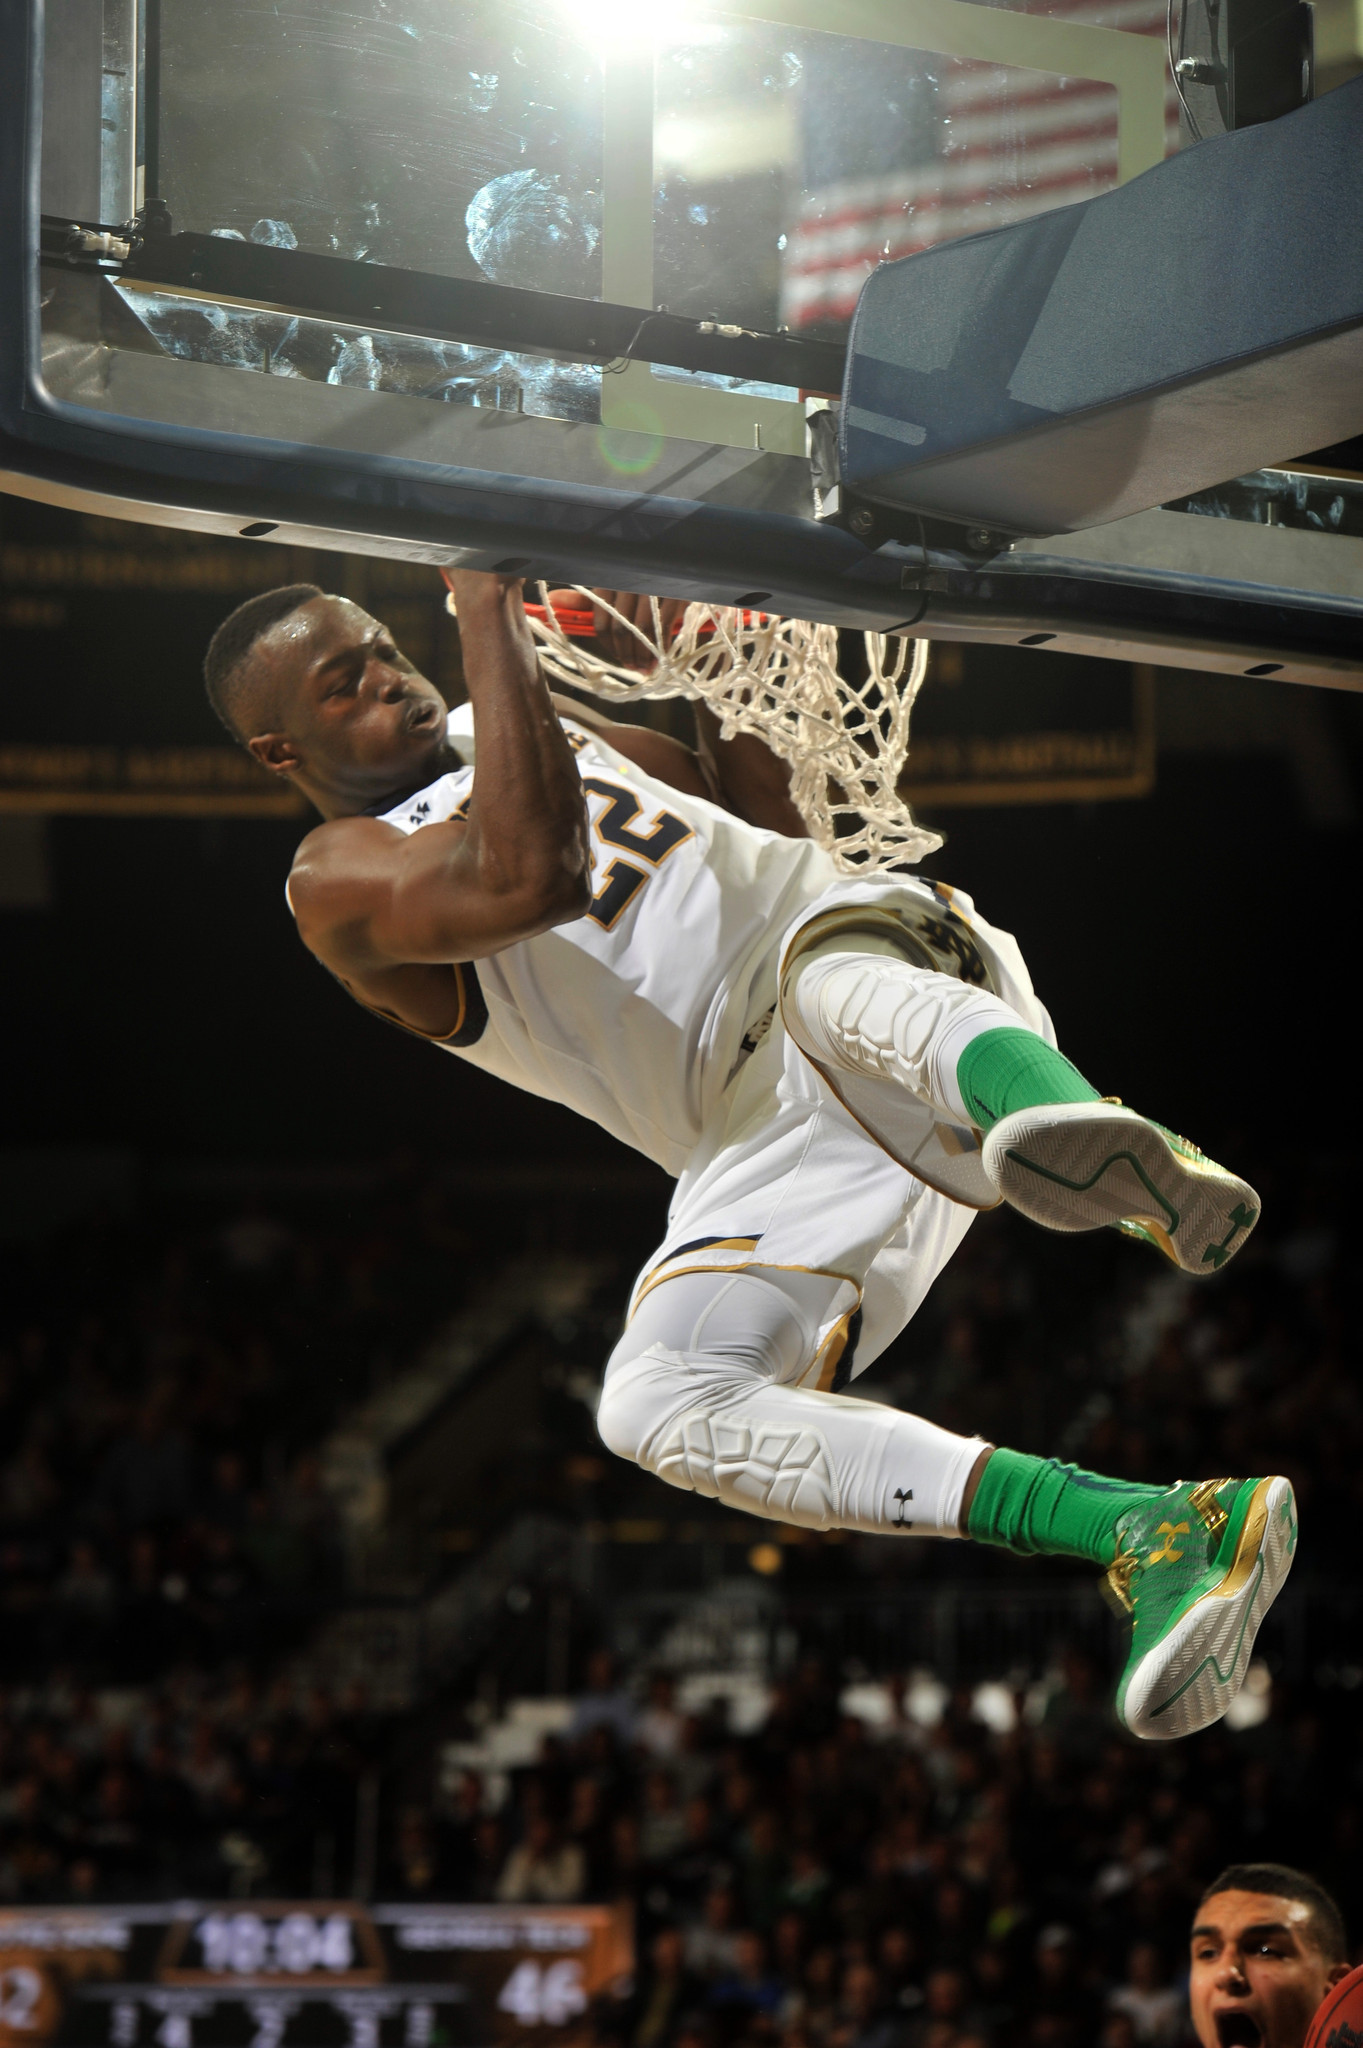 MUST SEE: Notre Dame's Jerian Grant with a monster dunk - Chicago Tribune